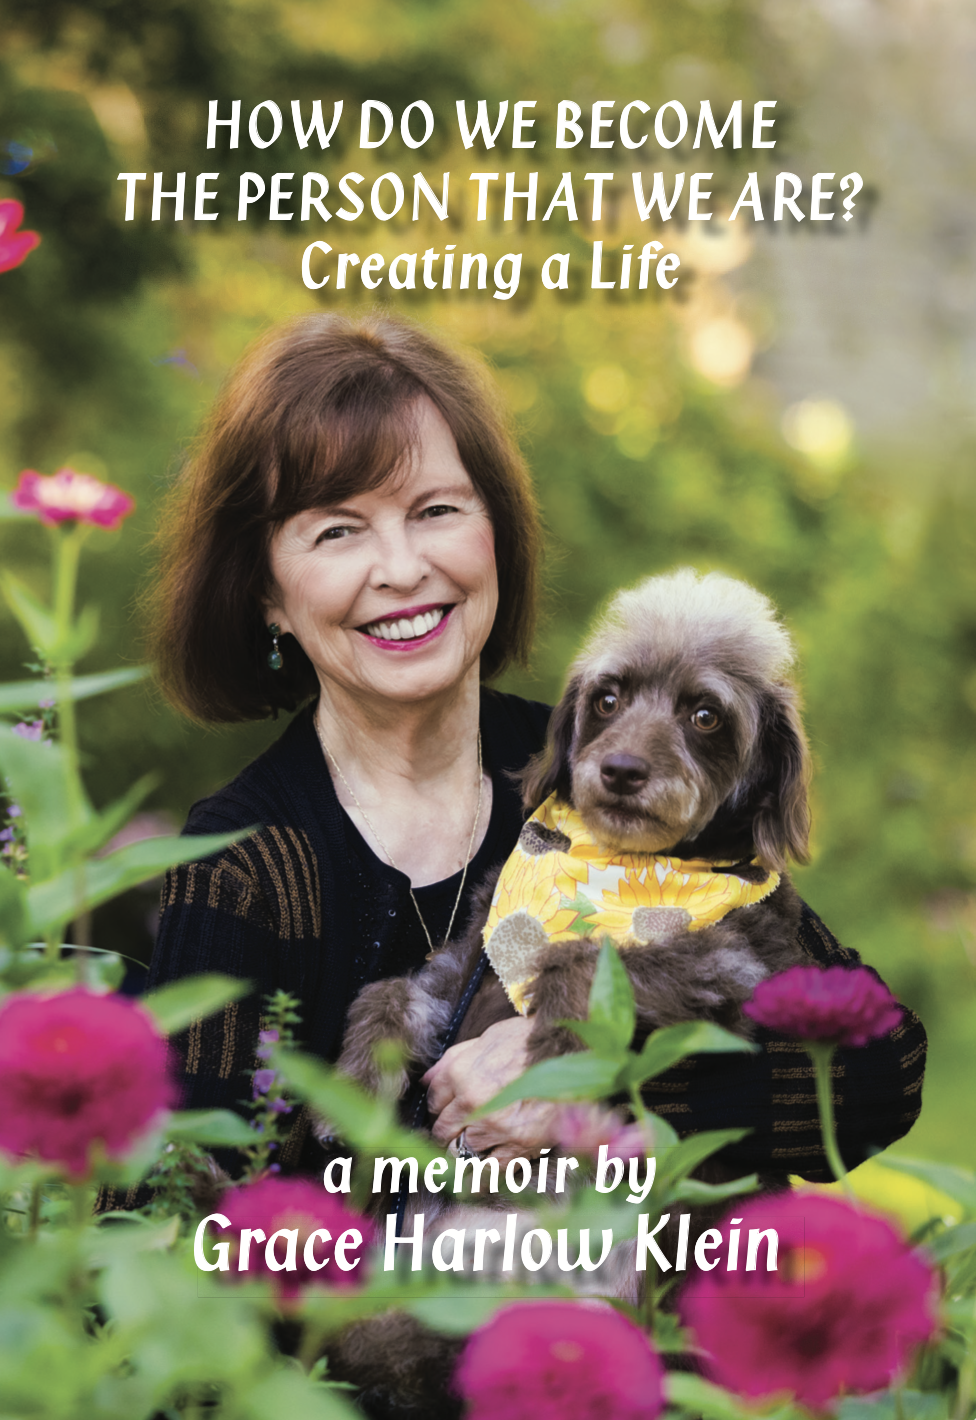 How Do We Become the Person That We Are? - Creating a life.  A memoir by Grace Harlow Klein